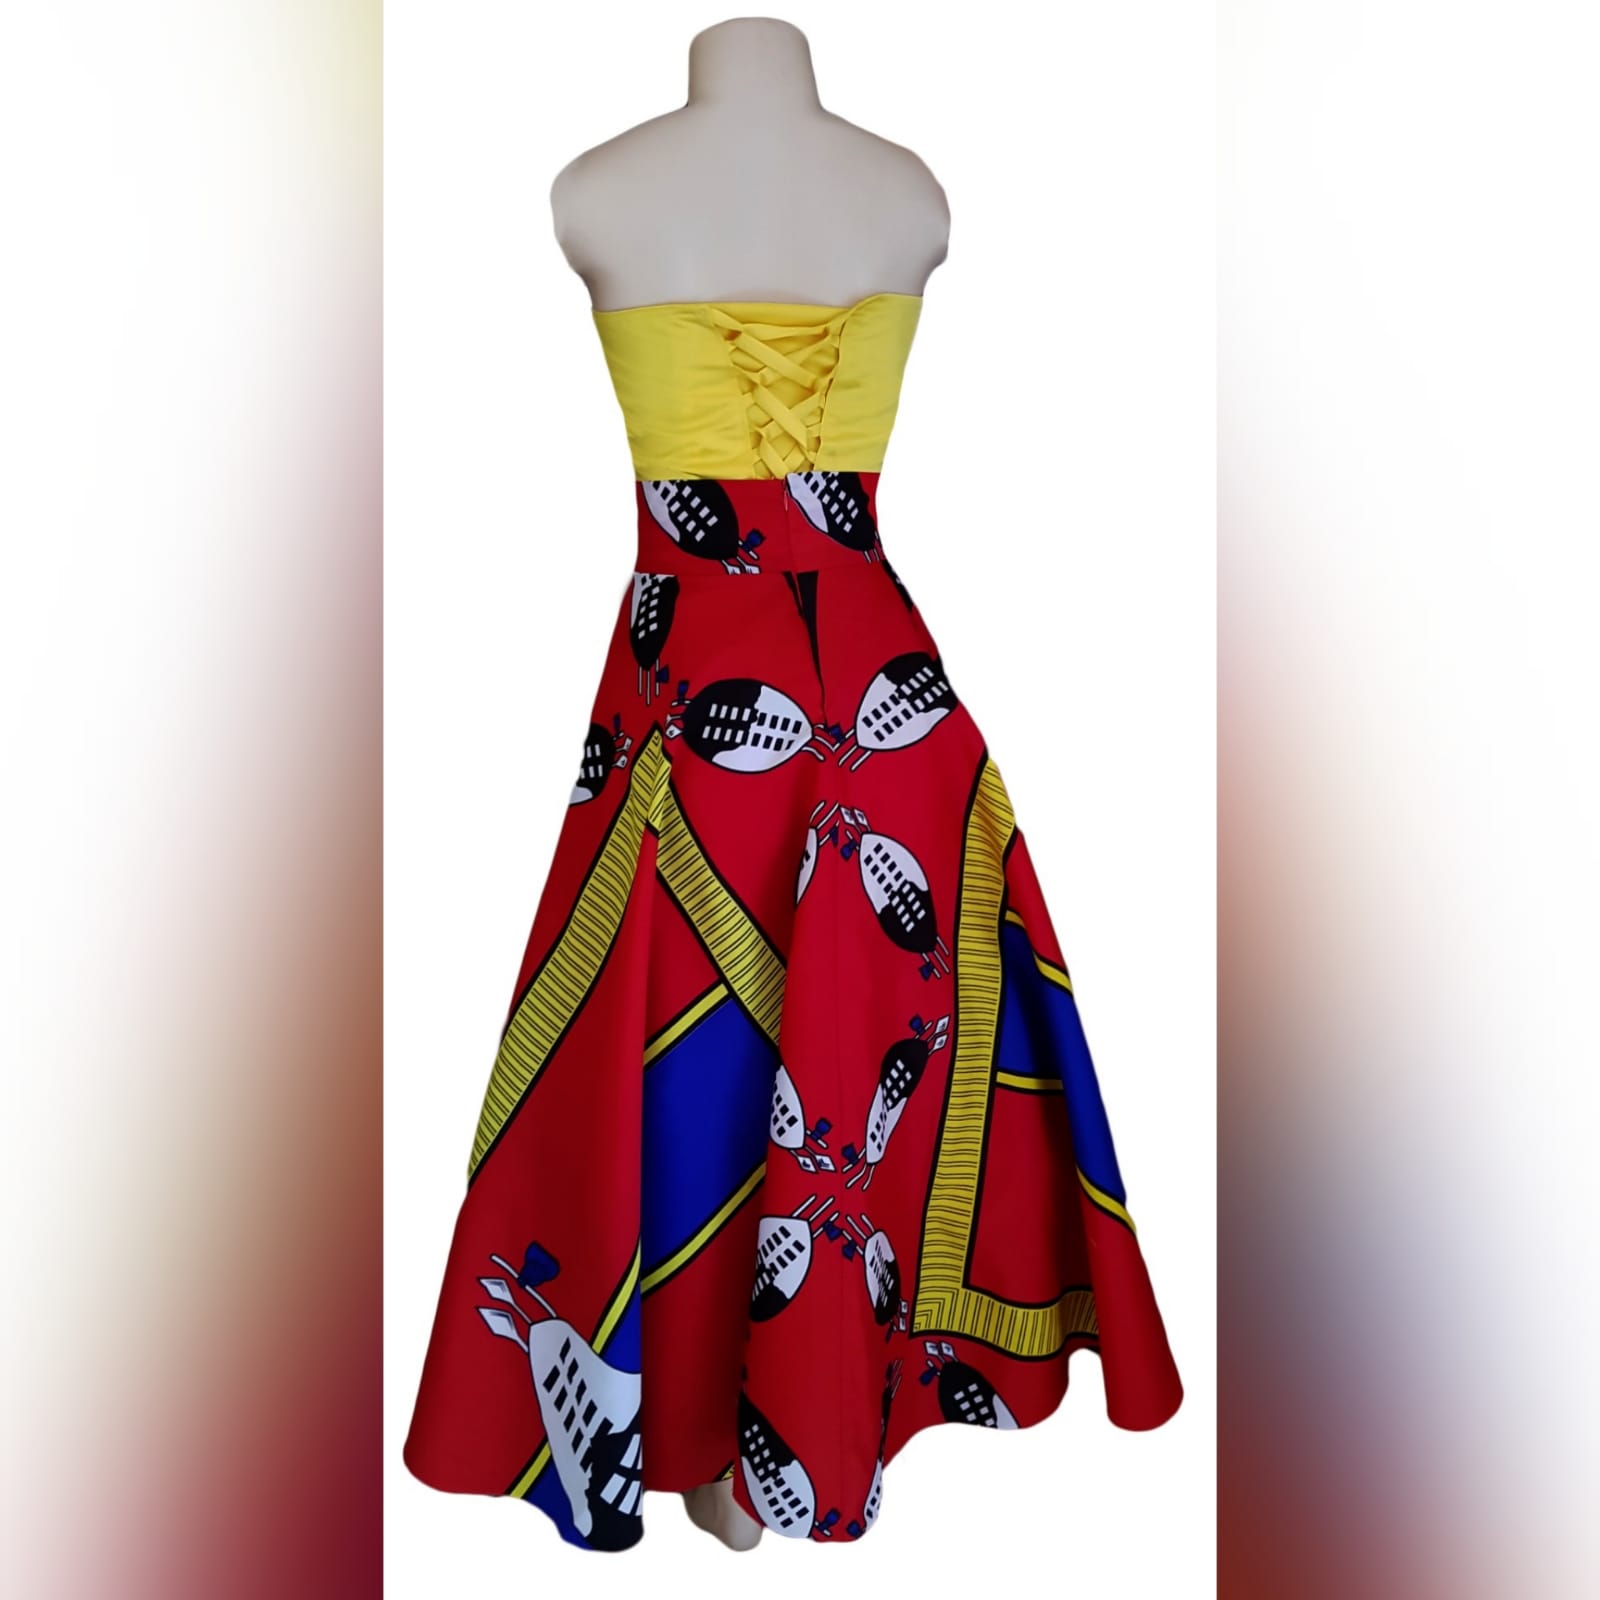 African traditional 2 piece outfit skirt and top 5 african traditional 2 piece outfit skirt and top. Red swati wide skirt with a high waisted effect. Boobtube yellow satin top with a lace-up back